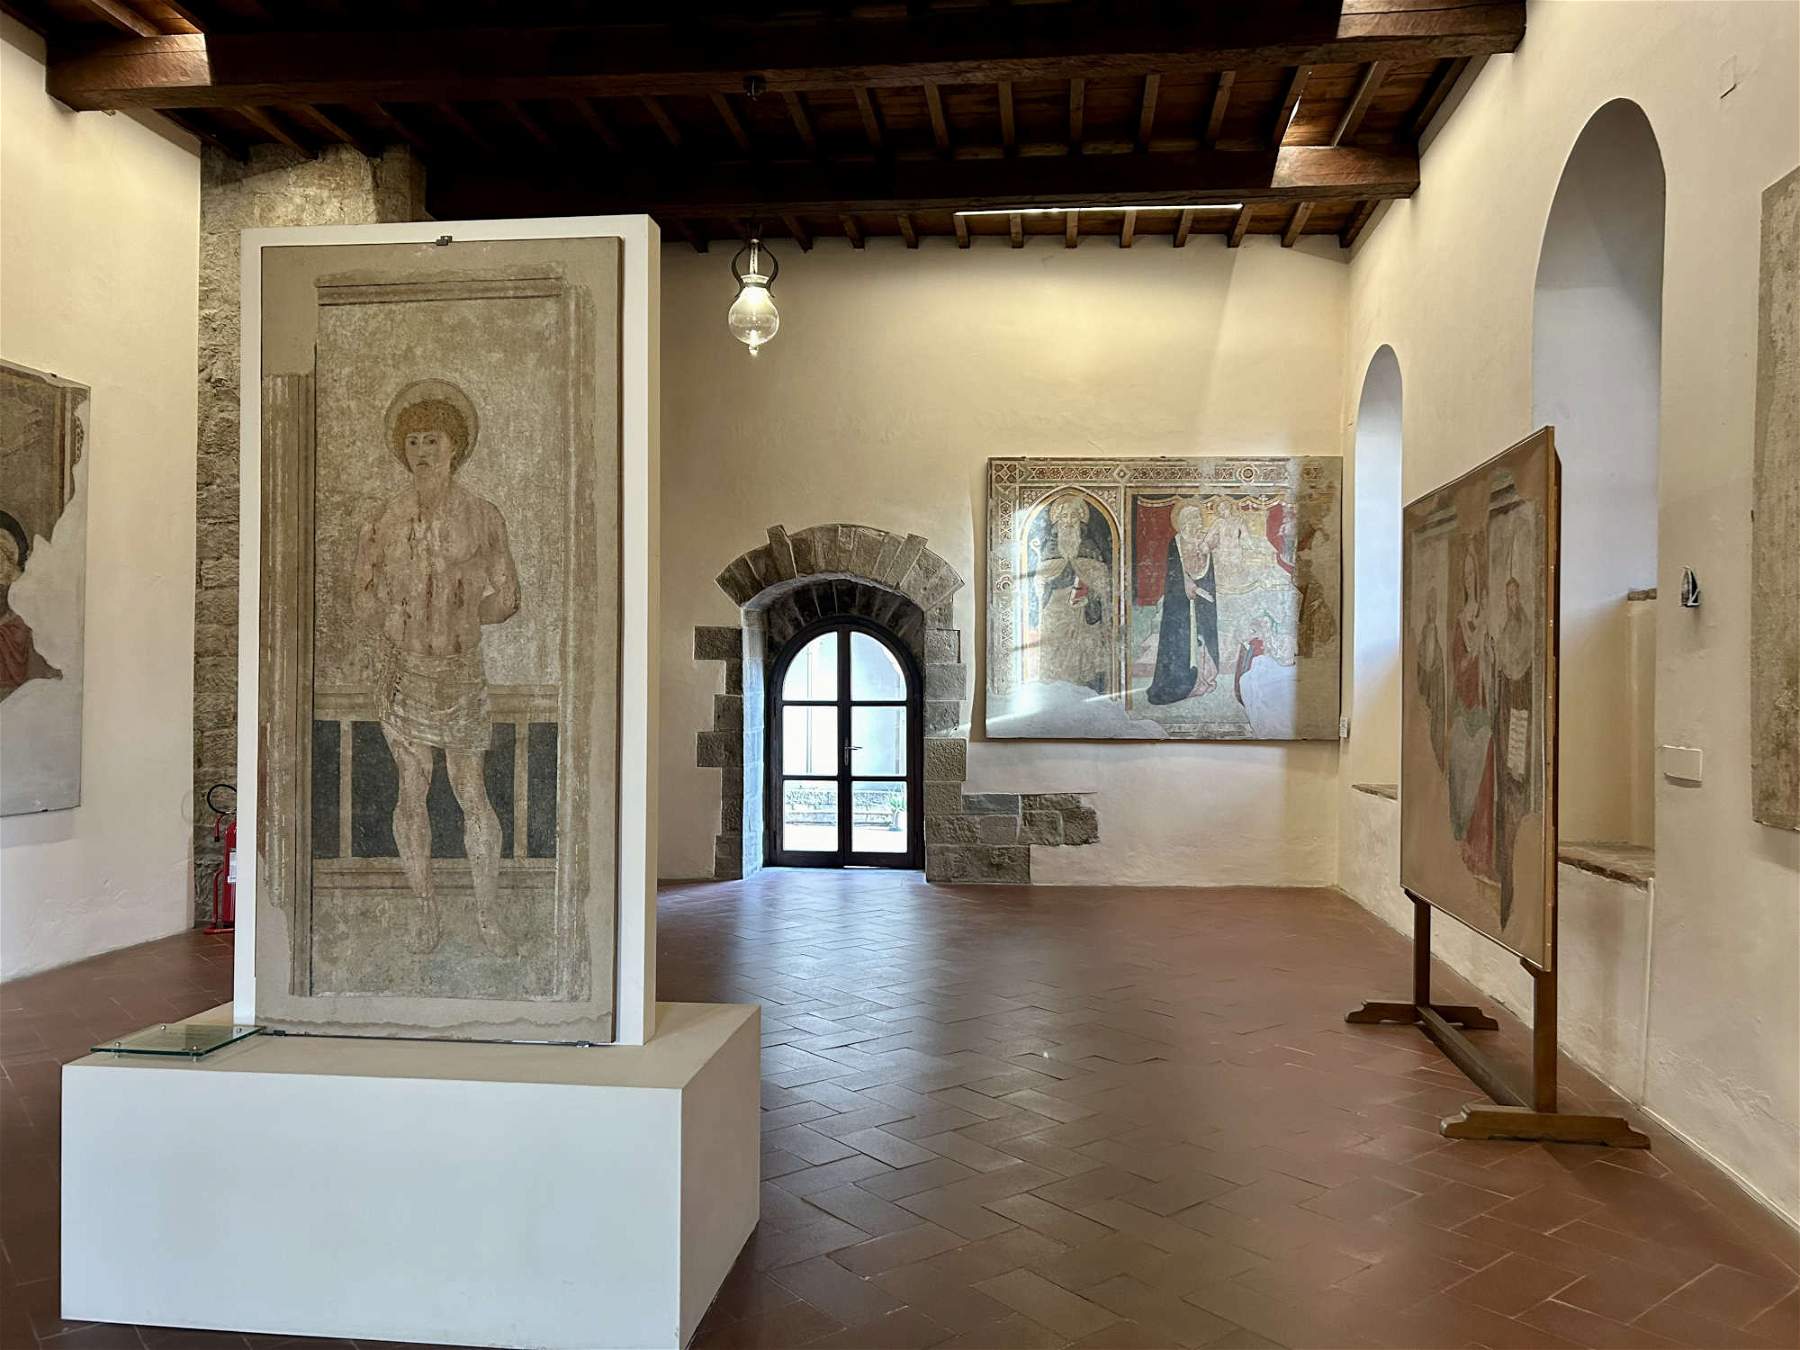 What to see in Sansepolcro: a historical-artistic itinerary through the streets of the center